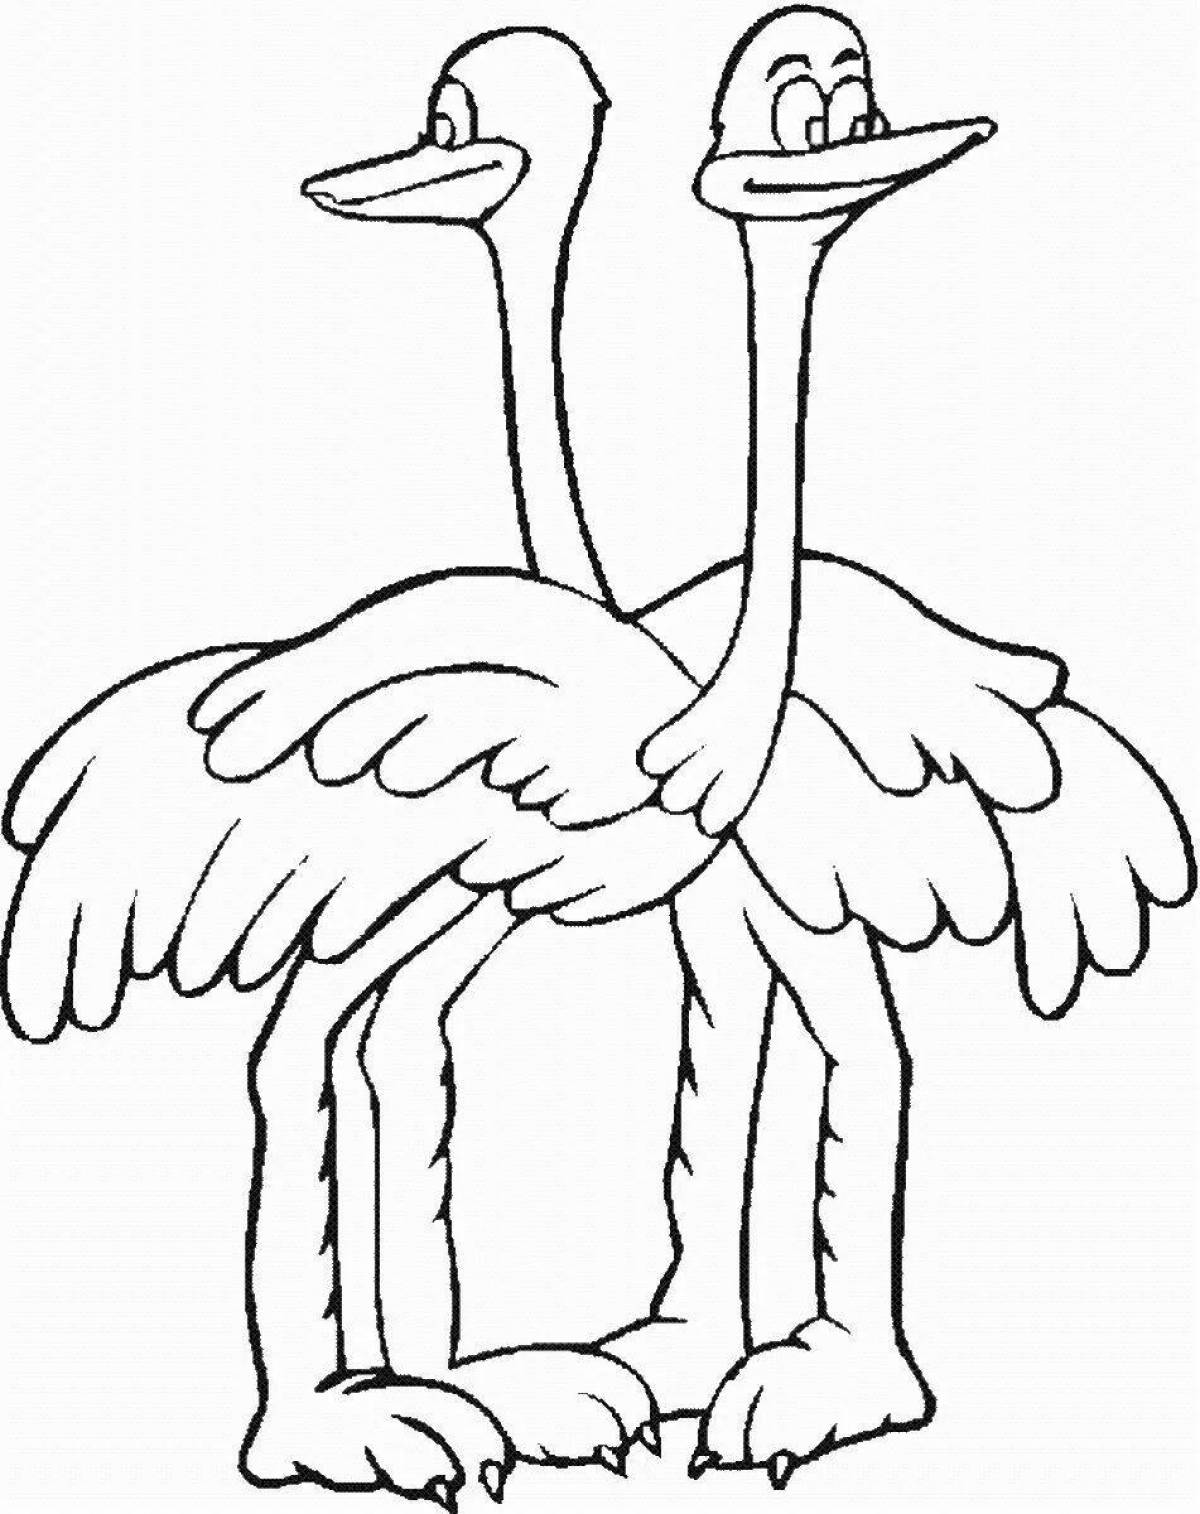 Creative emu coloring book for kids